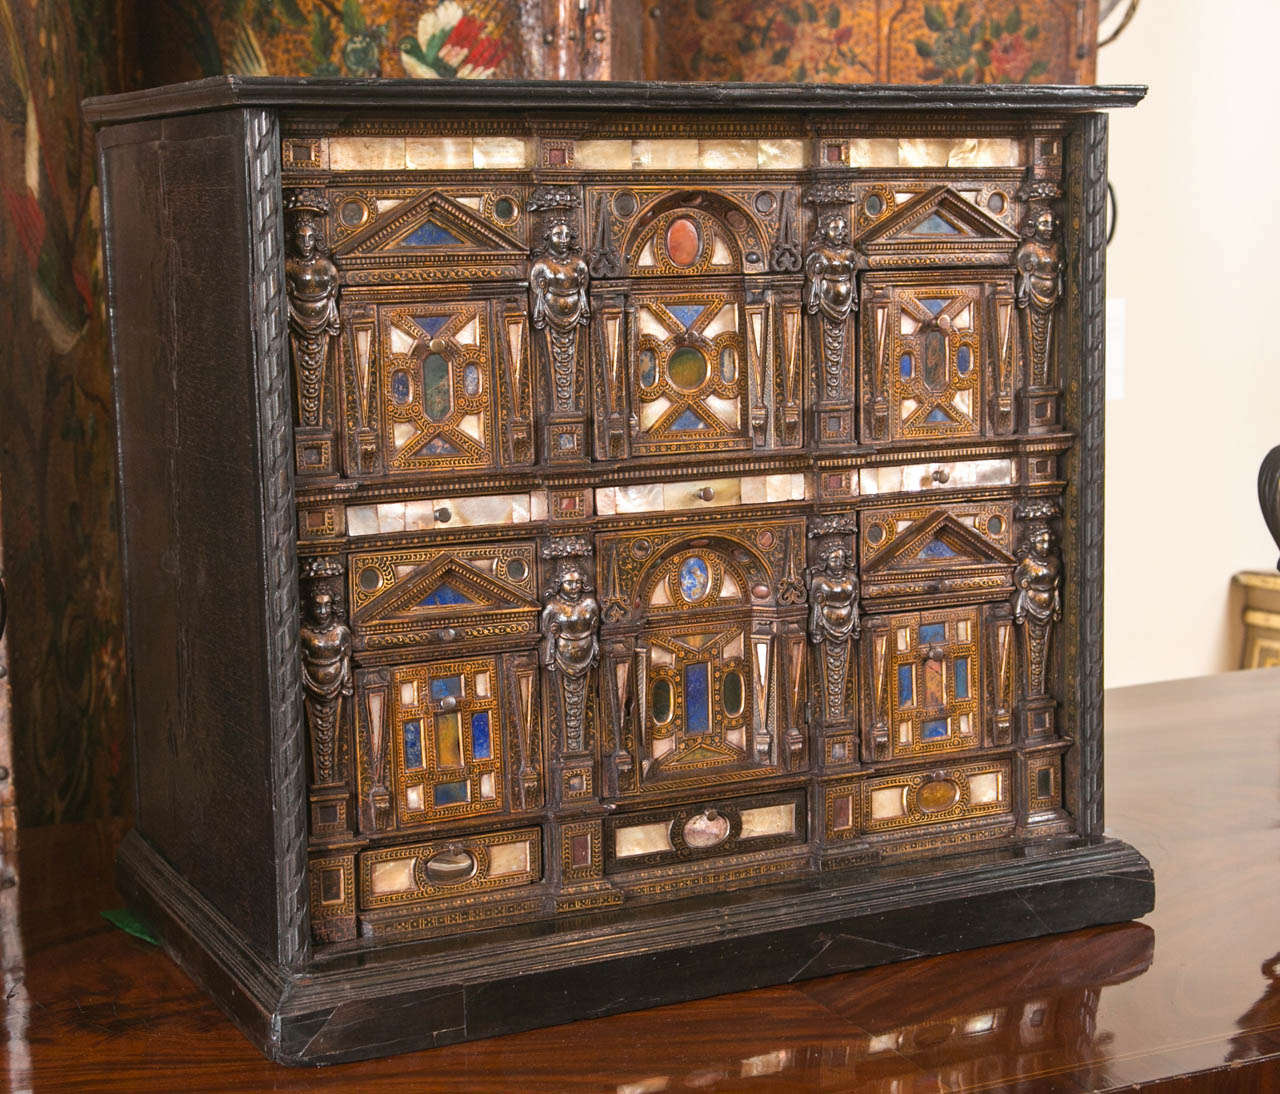 An exceptional Italian table cabinet dating from the late 16th to early 17th century in an ebonized case with multiple drawers inset with various semi-precious stones, lapis lazuli, mother of pearl etc. for a similar example see Hans Huth 